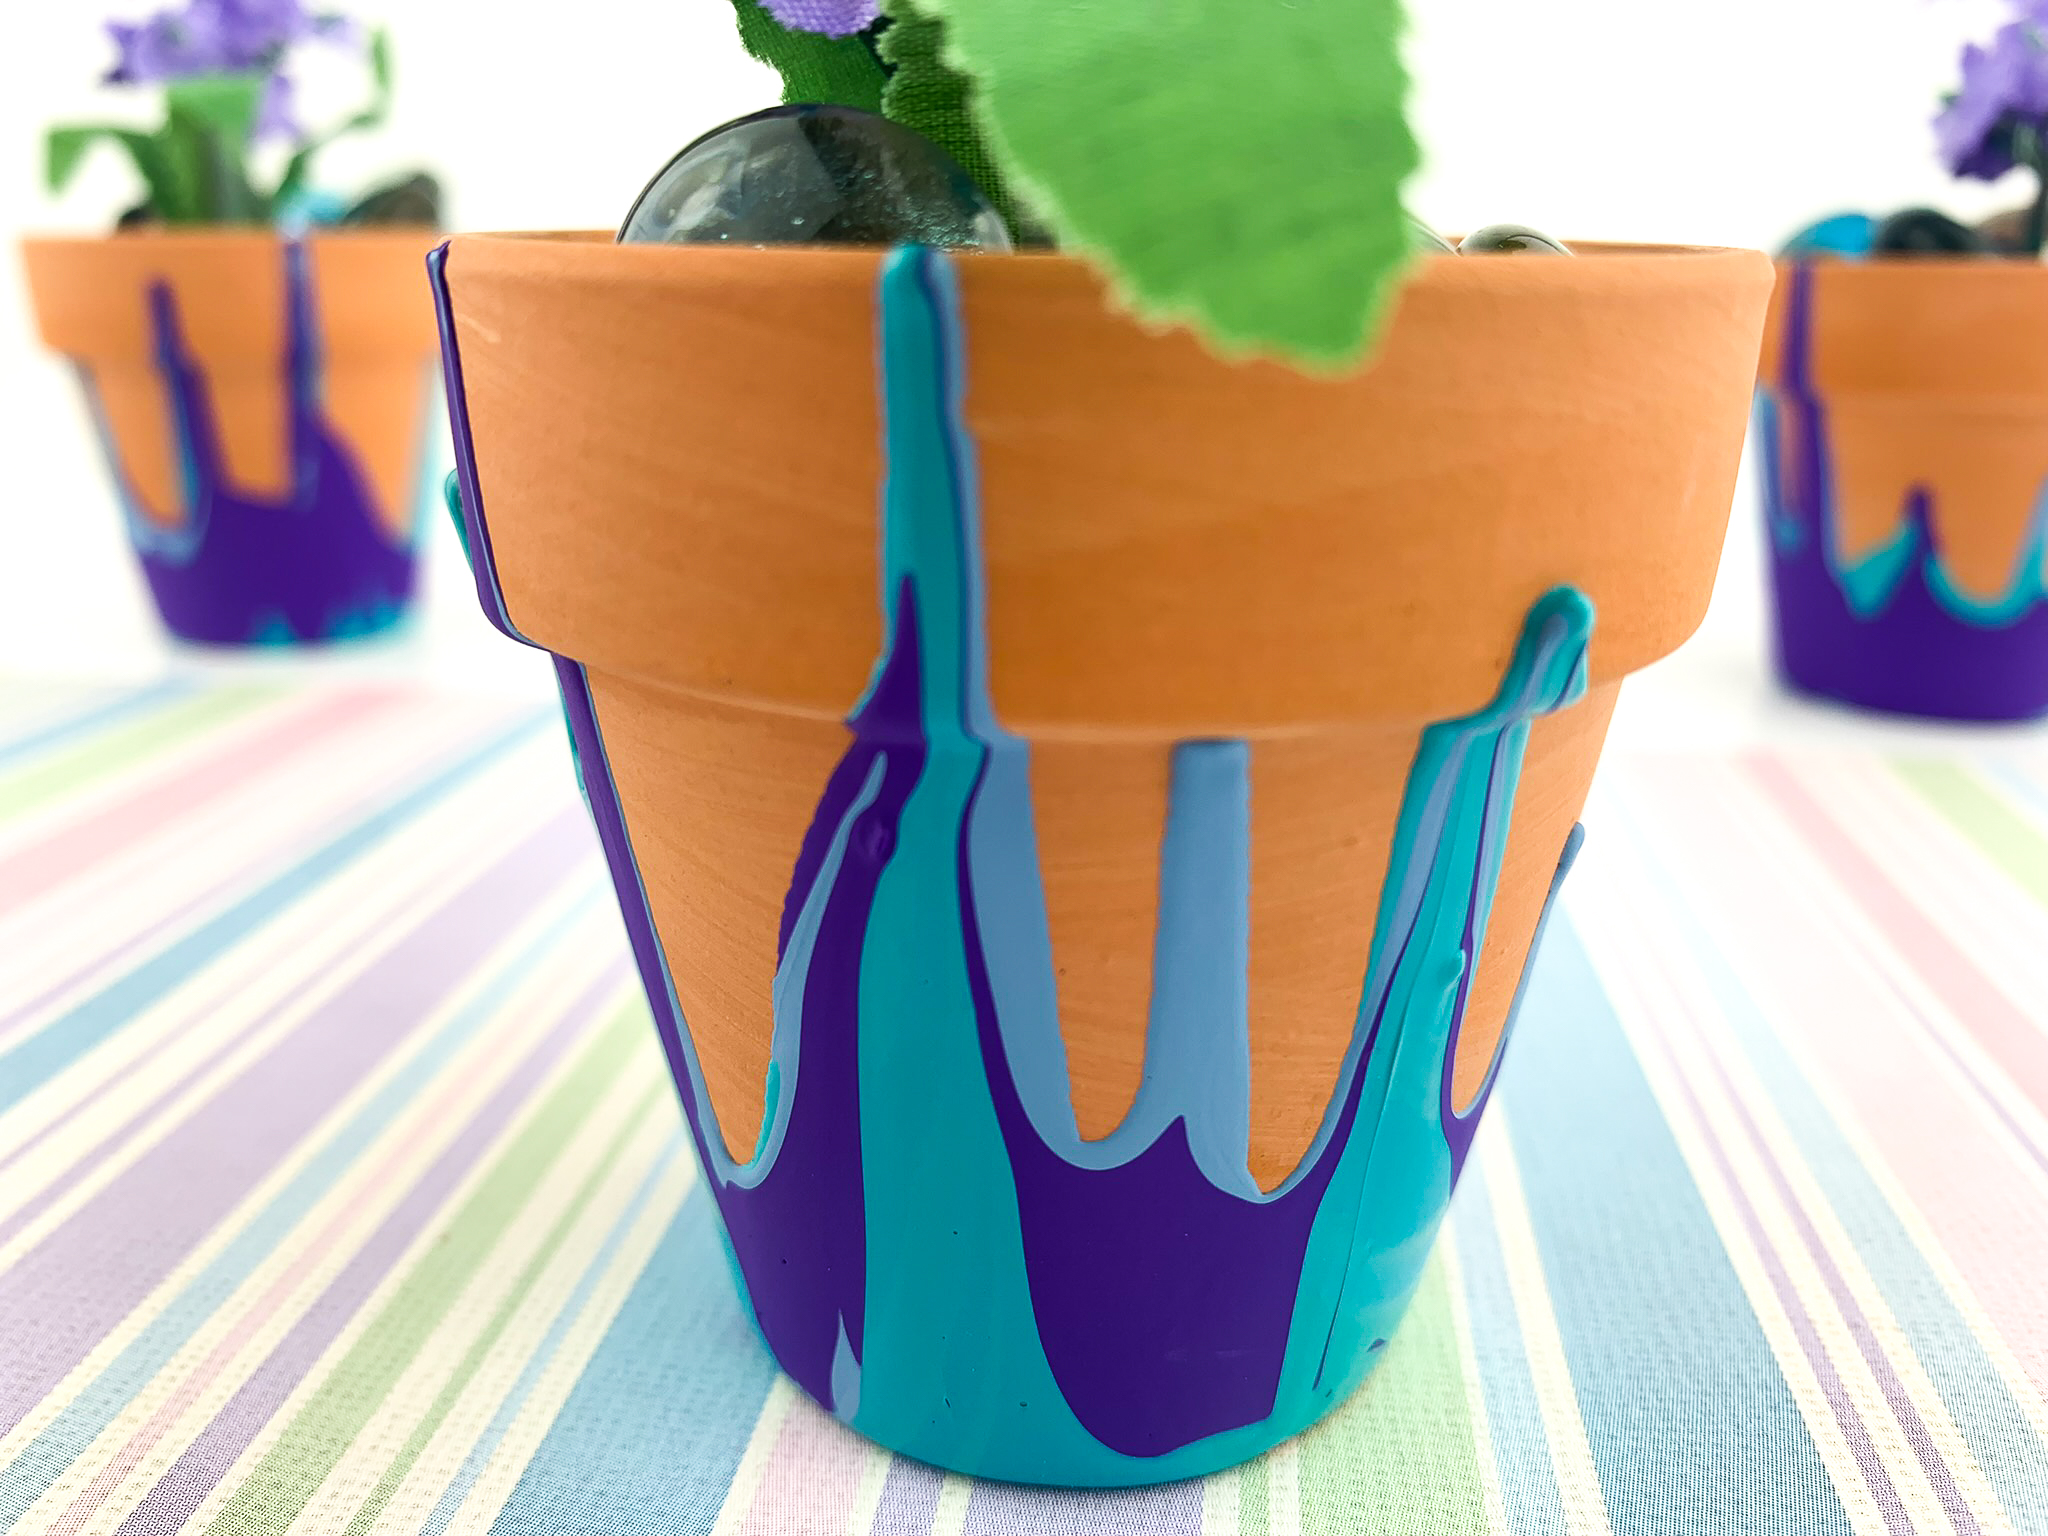 Painting Plastic Flower Pots: Adding Color to Your Garden缩略图